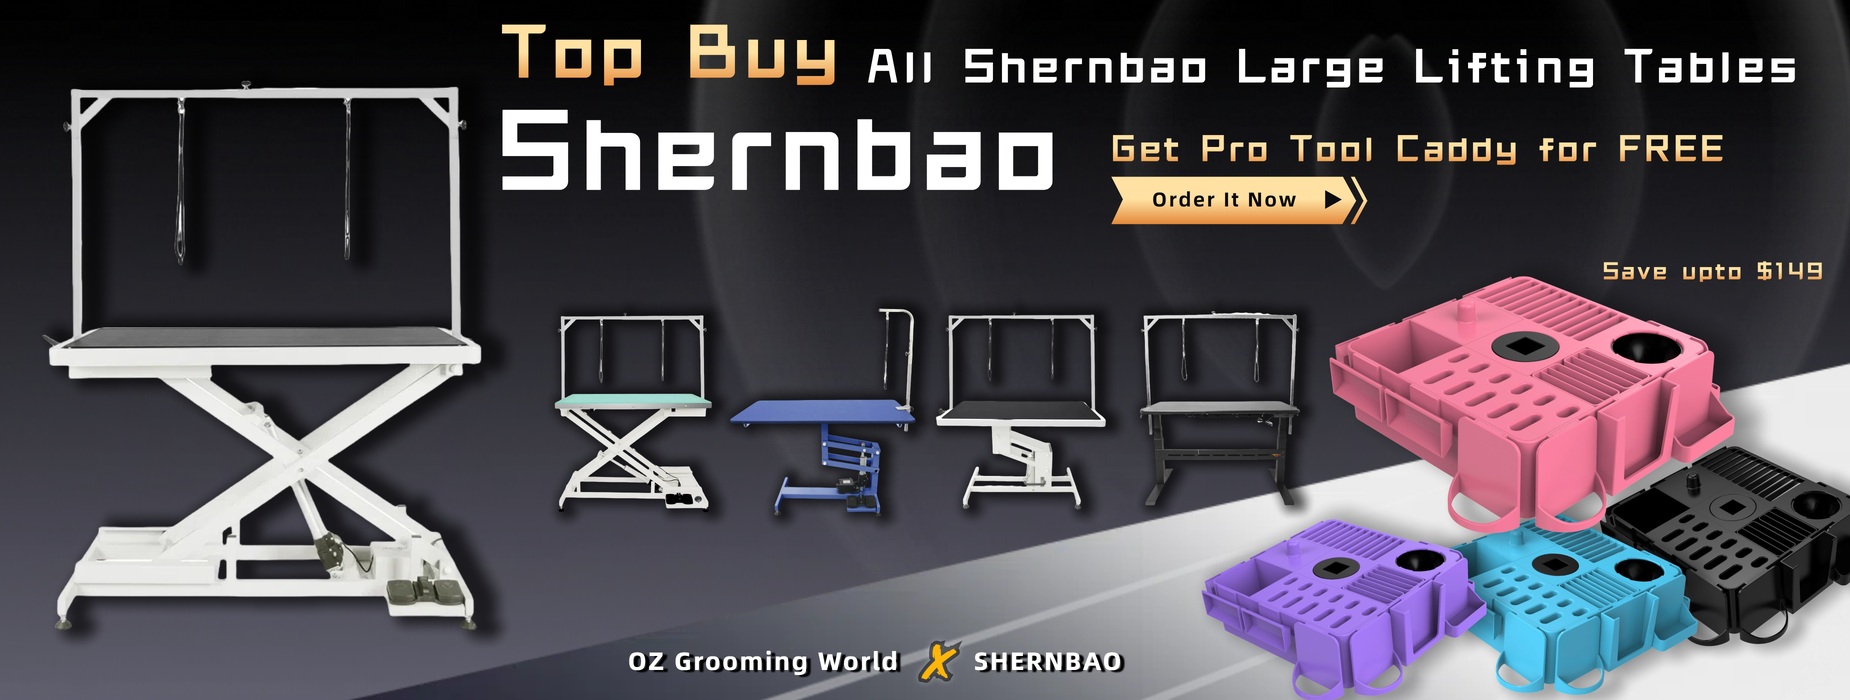 FREE Pro Caddy with Shernbao Large Lifting Table